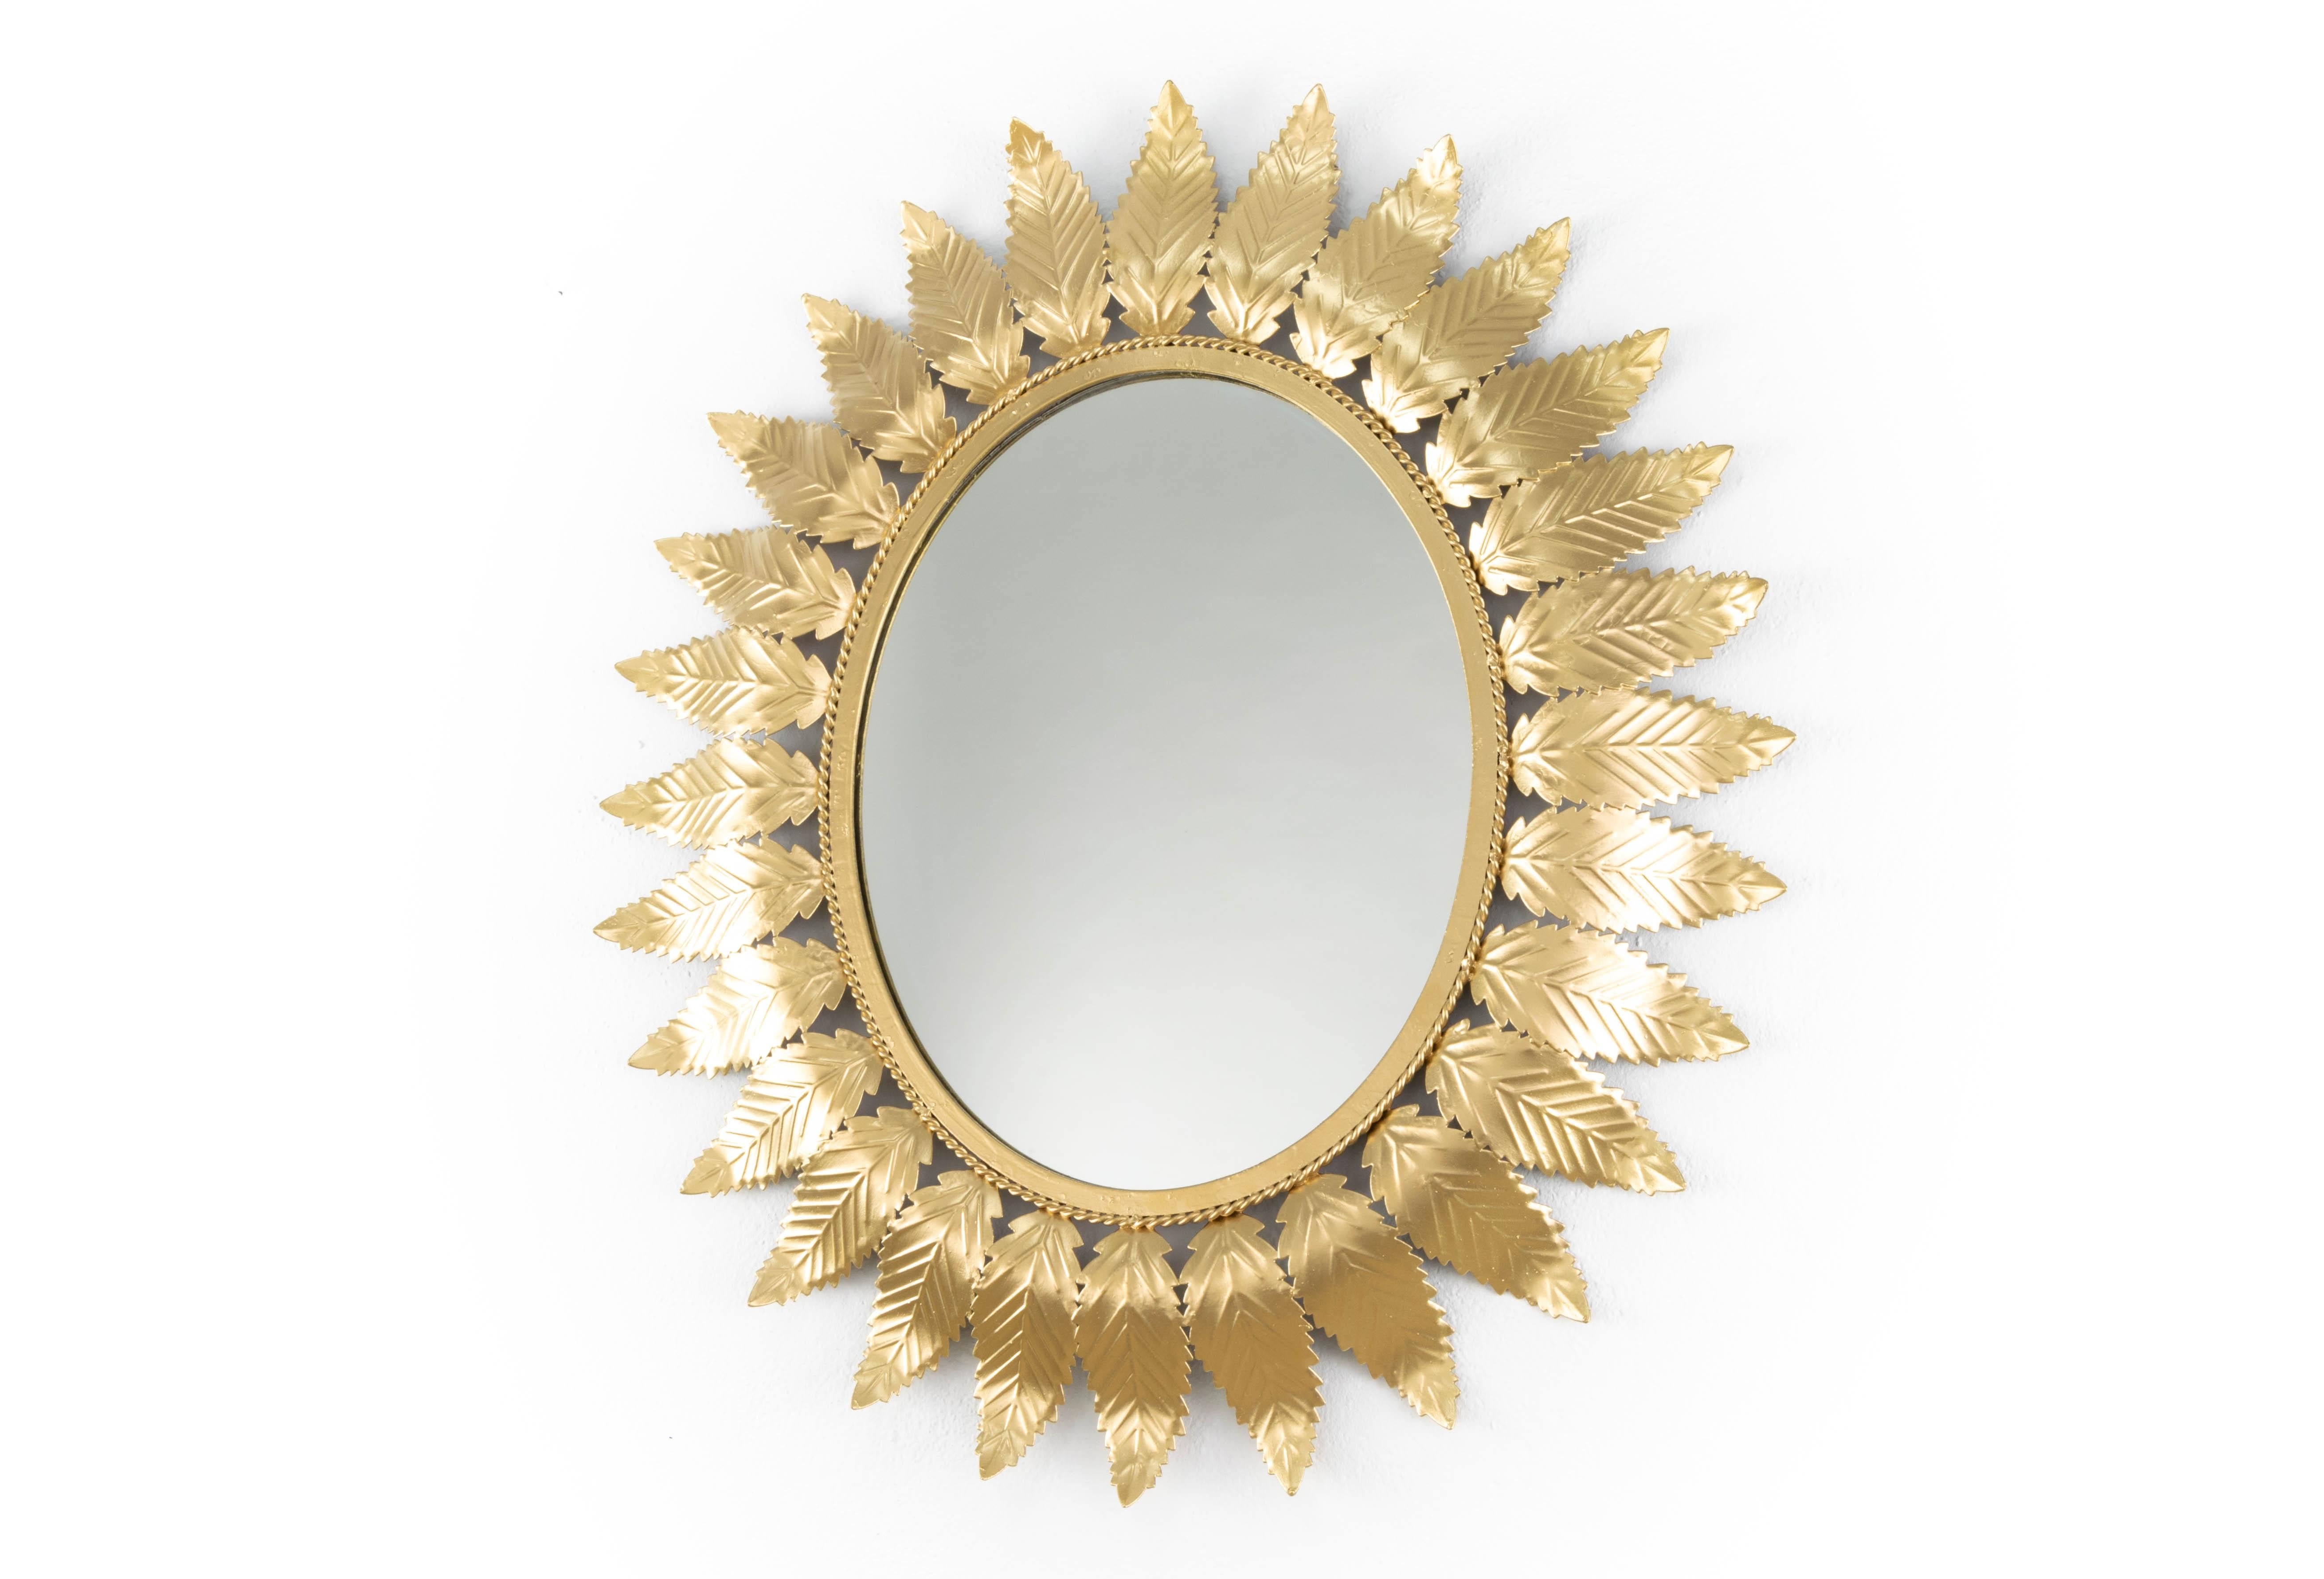 Metallic mirror with gold finish in the form of sun, 1970s`
Measurements:
Total height 77 cm
Width 67 cm.